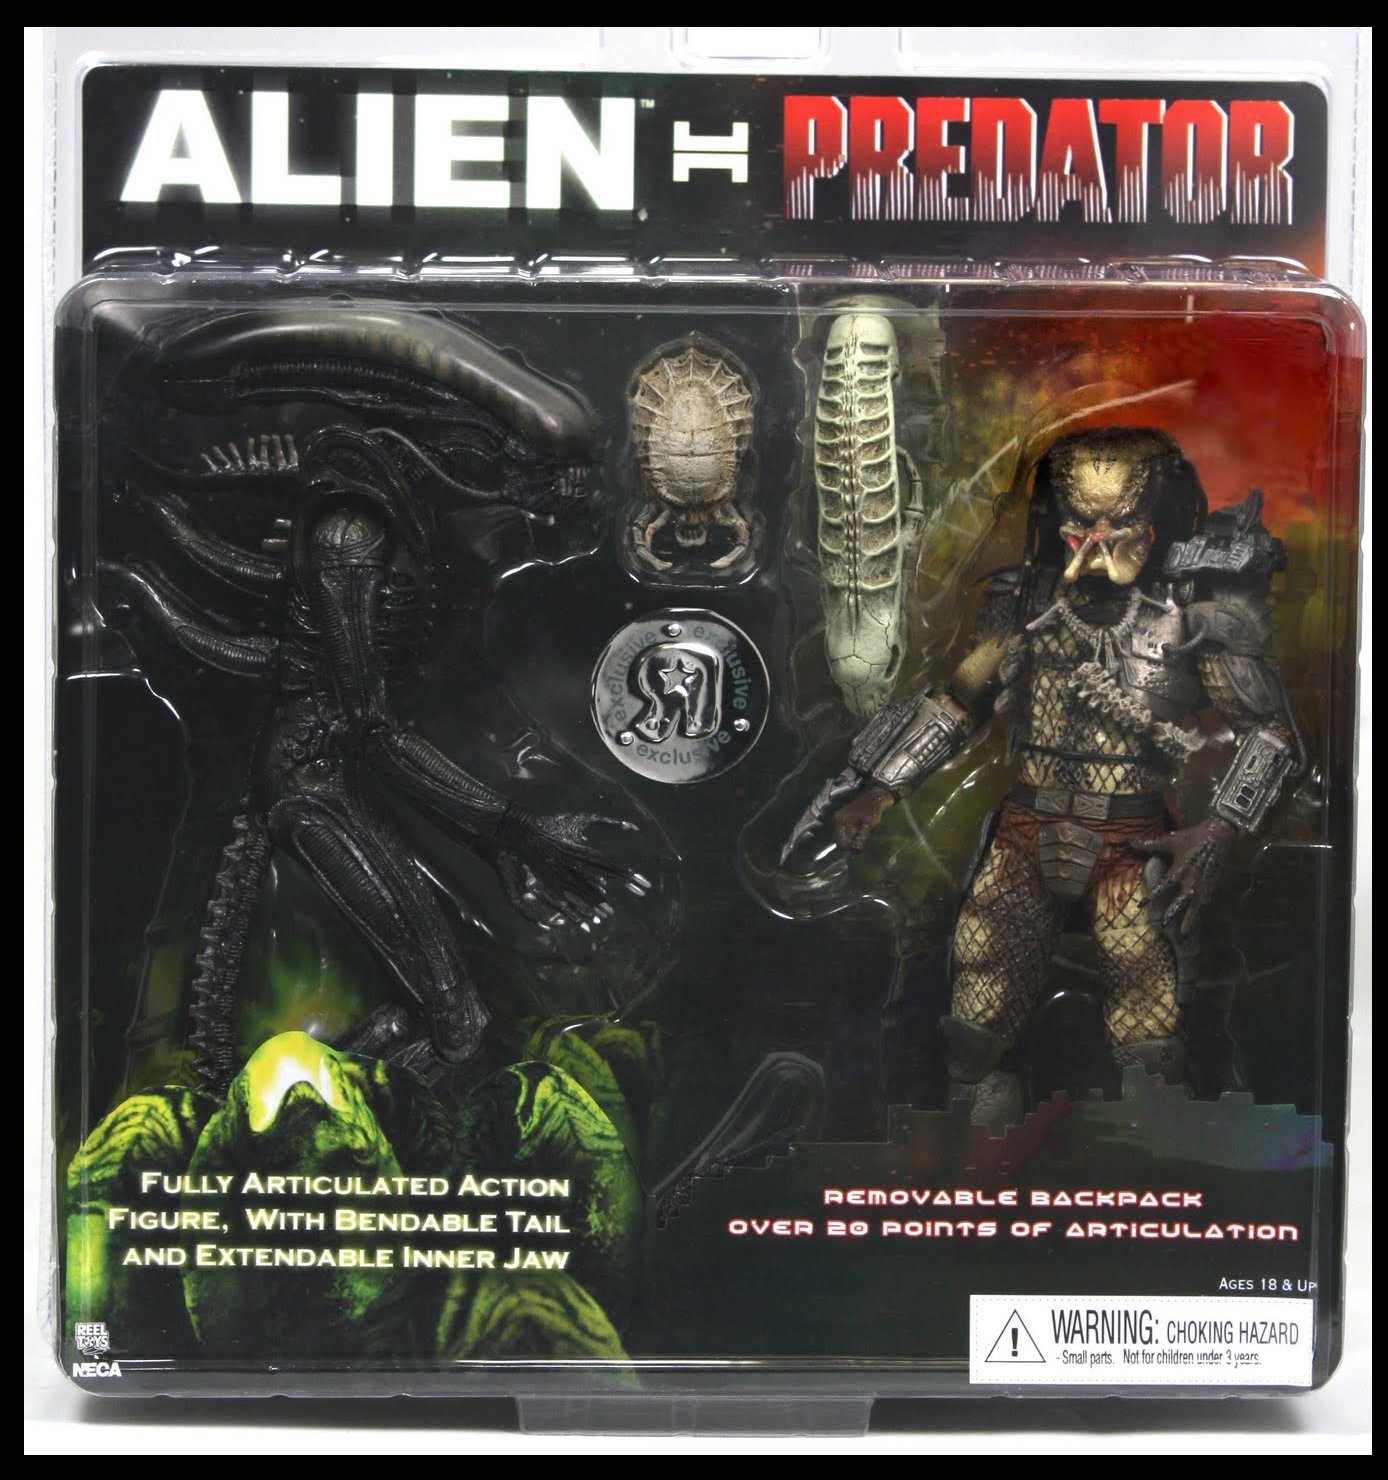 It consists of two figures that were previously released by NECA: the